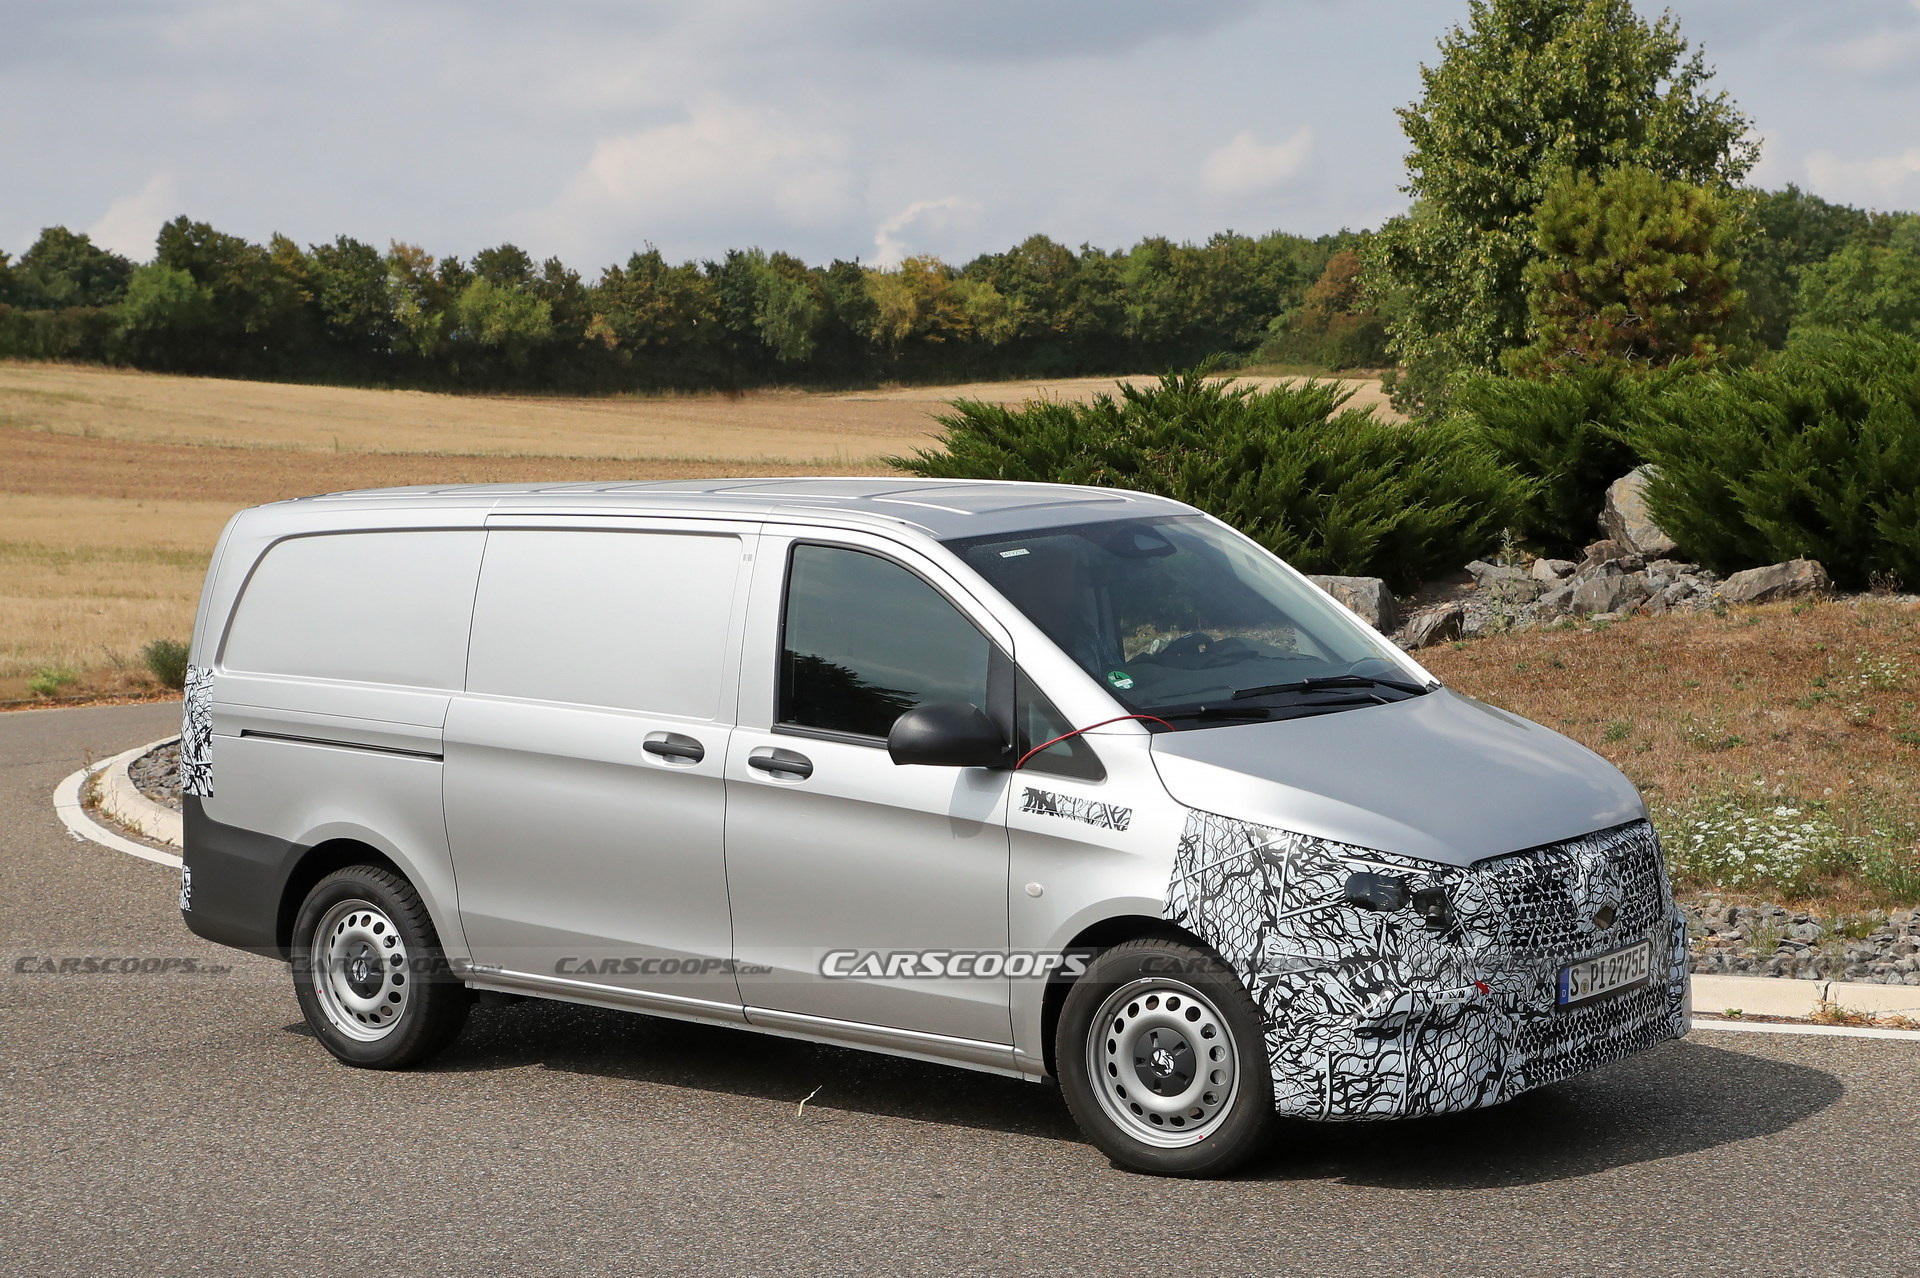 New look Mercedes-Benz Vito available in front, rear and all-wheel